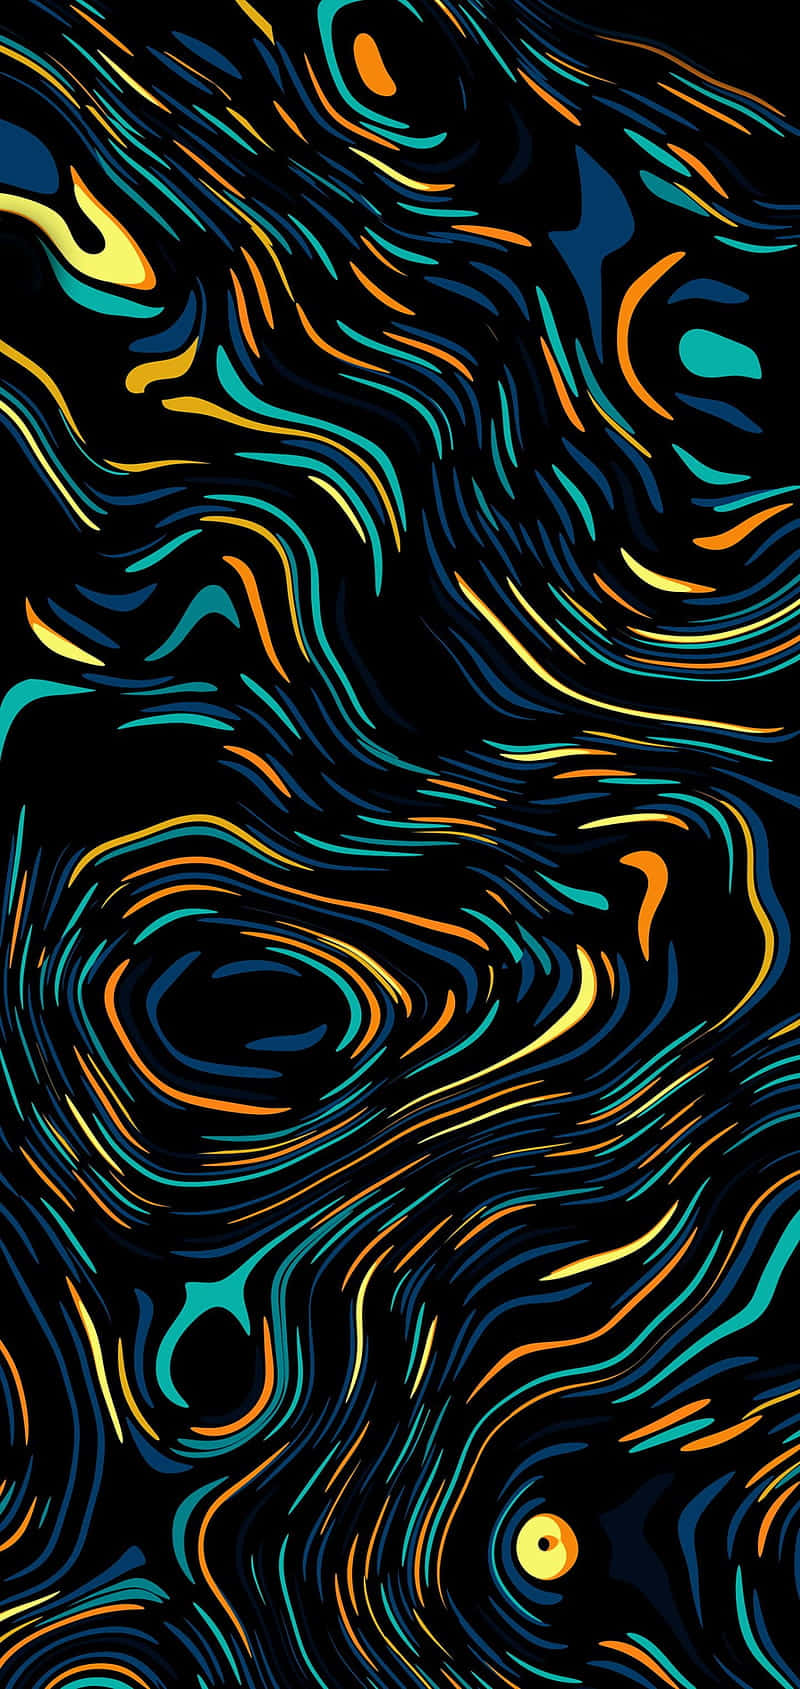 A Colorful Abstract Pattern With Waves On A Black Background Wallpaper